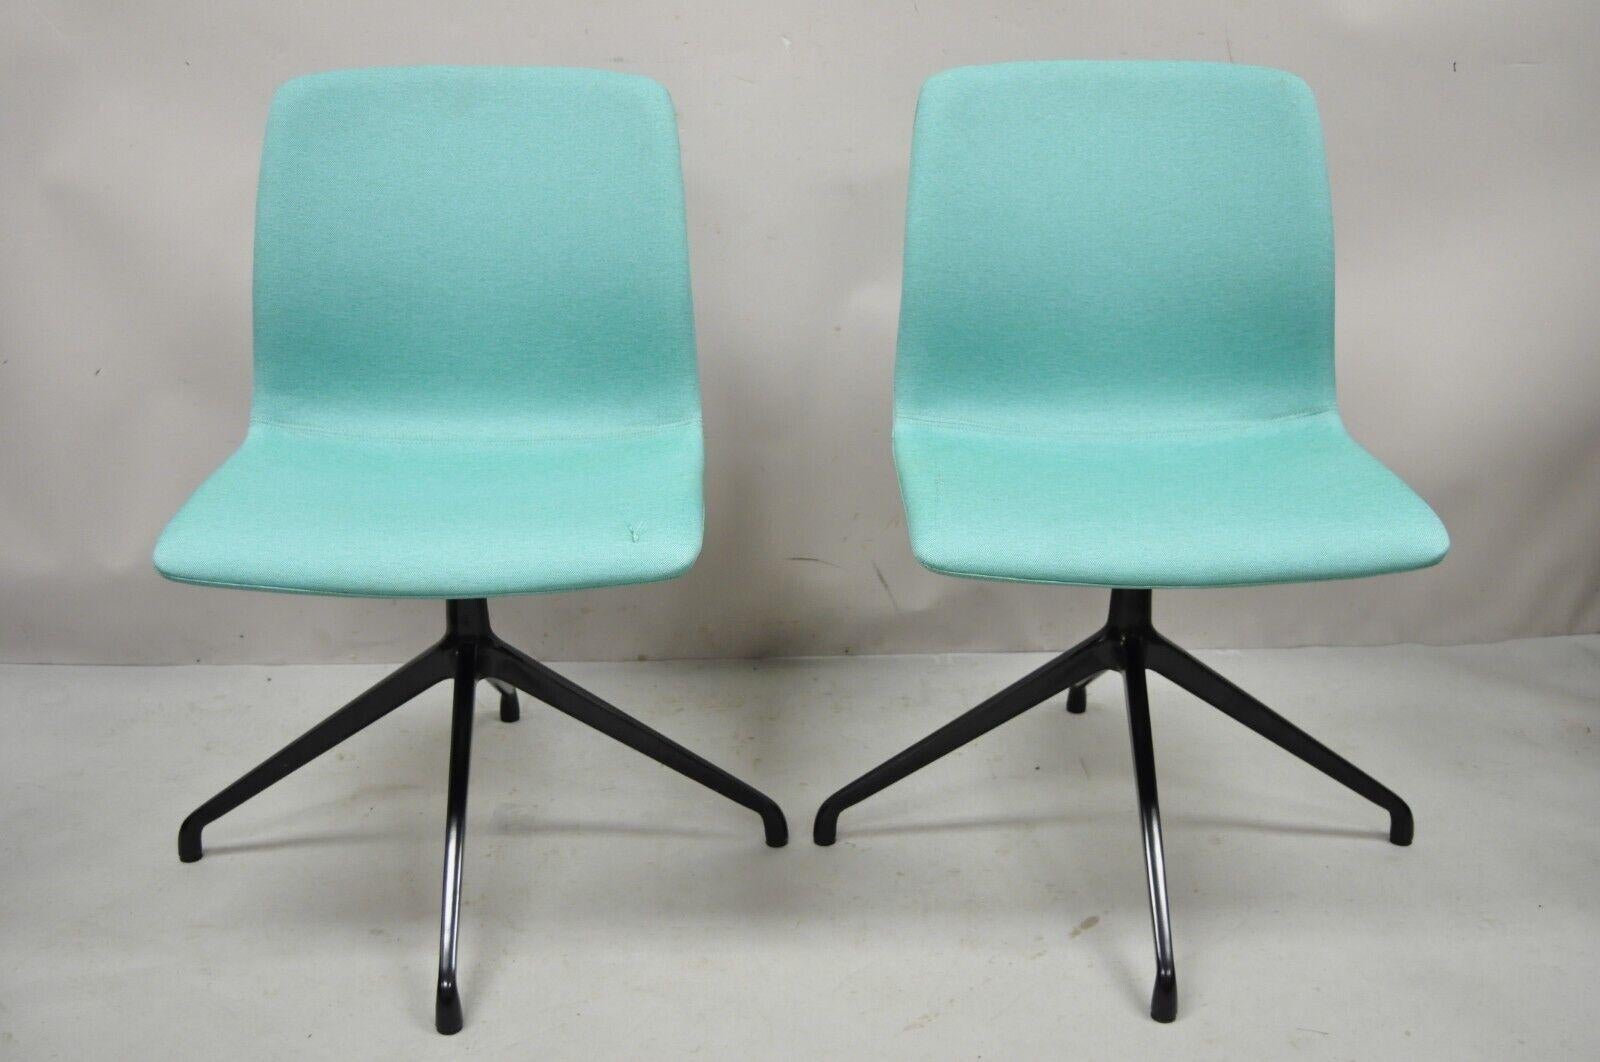 ODS Hairpin Swivel base blue Upholstered side chair - a pair. Item features swivel seat metal base, original label, quality craftsmanship, great style and form, retail price 900+ each. Circa 21st century. Measurements: 31.5